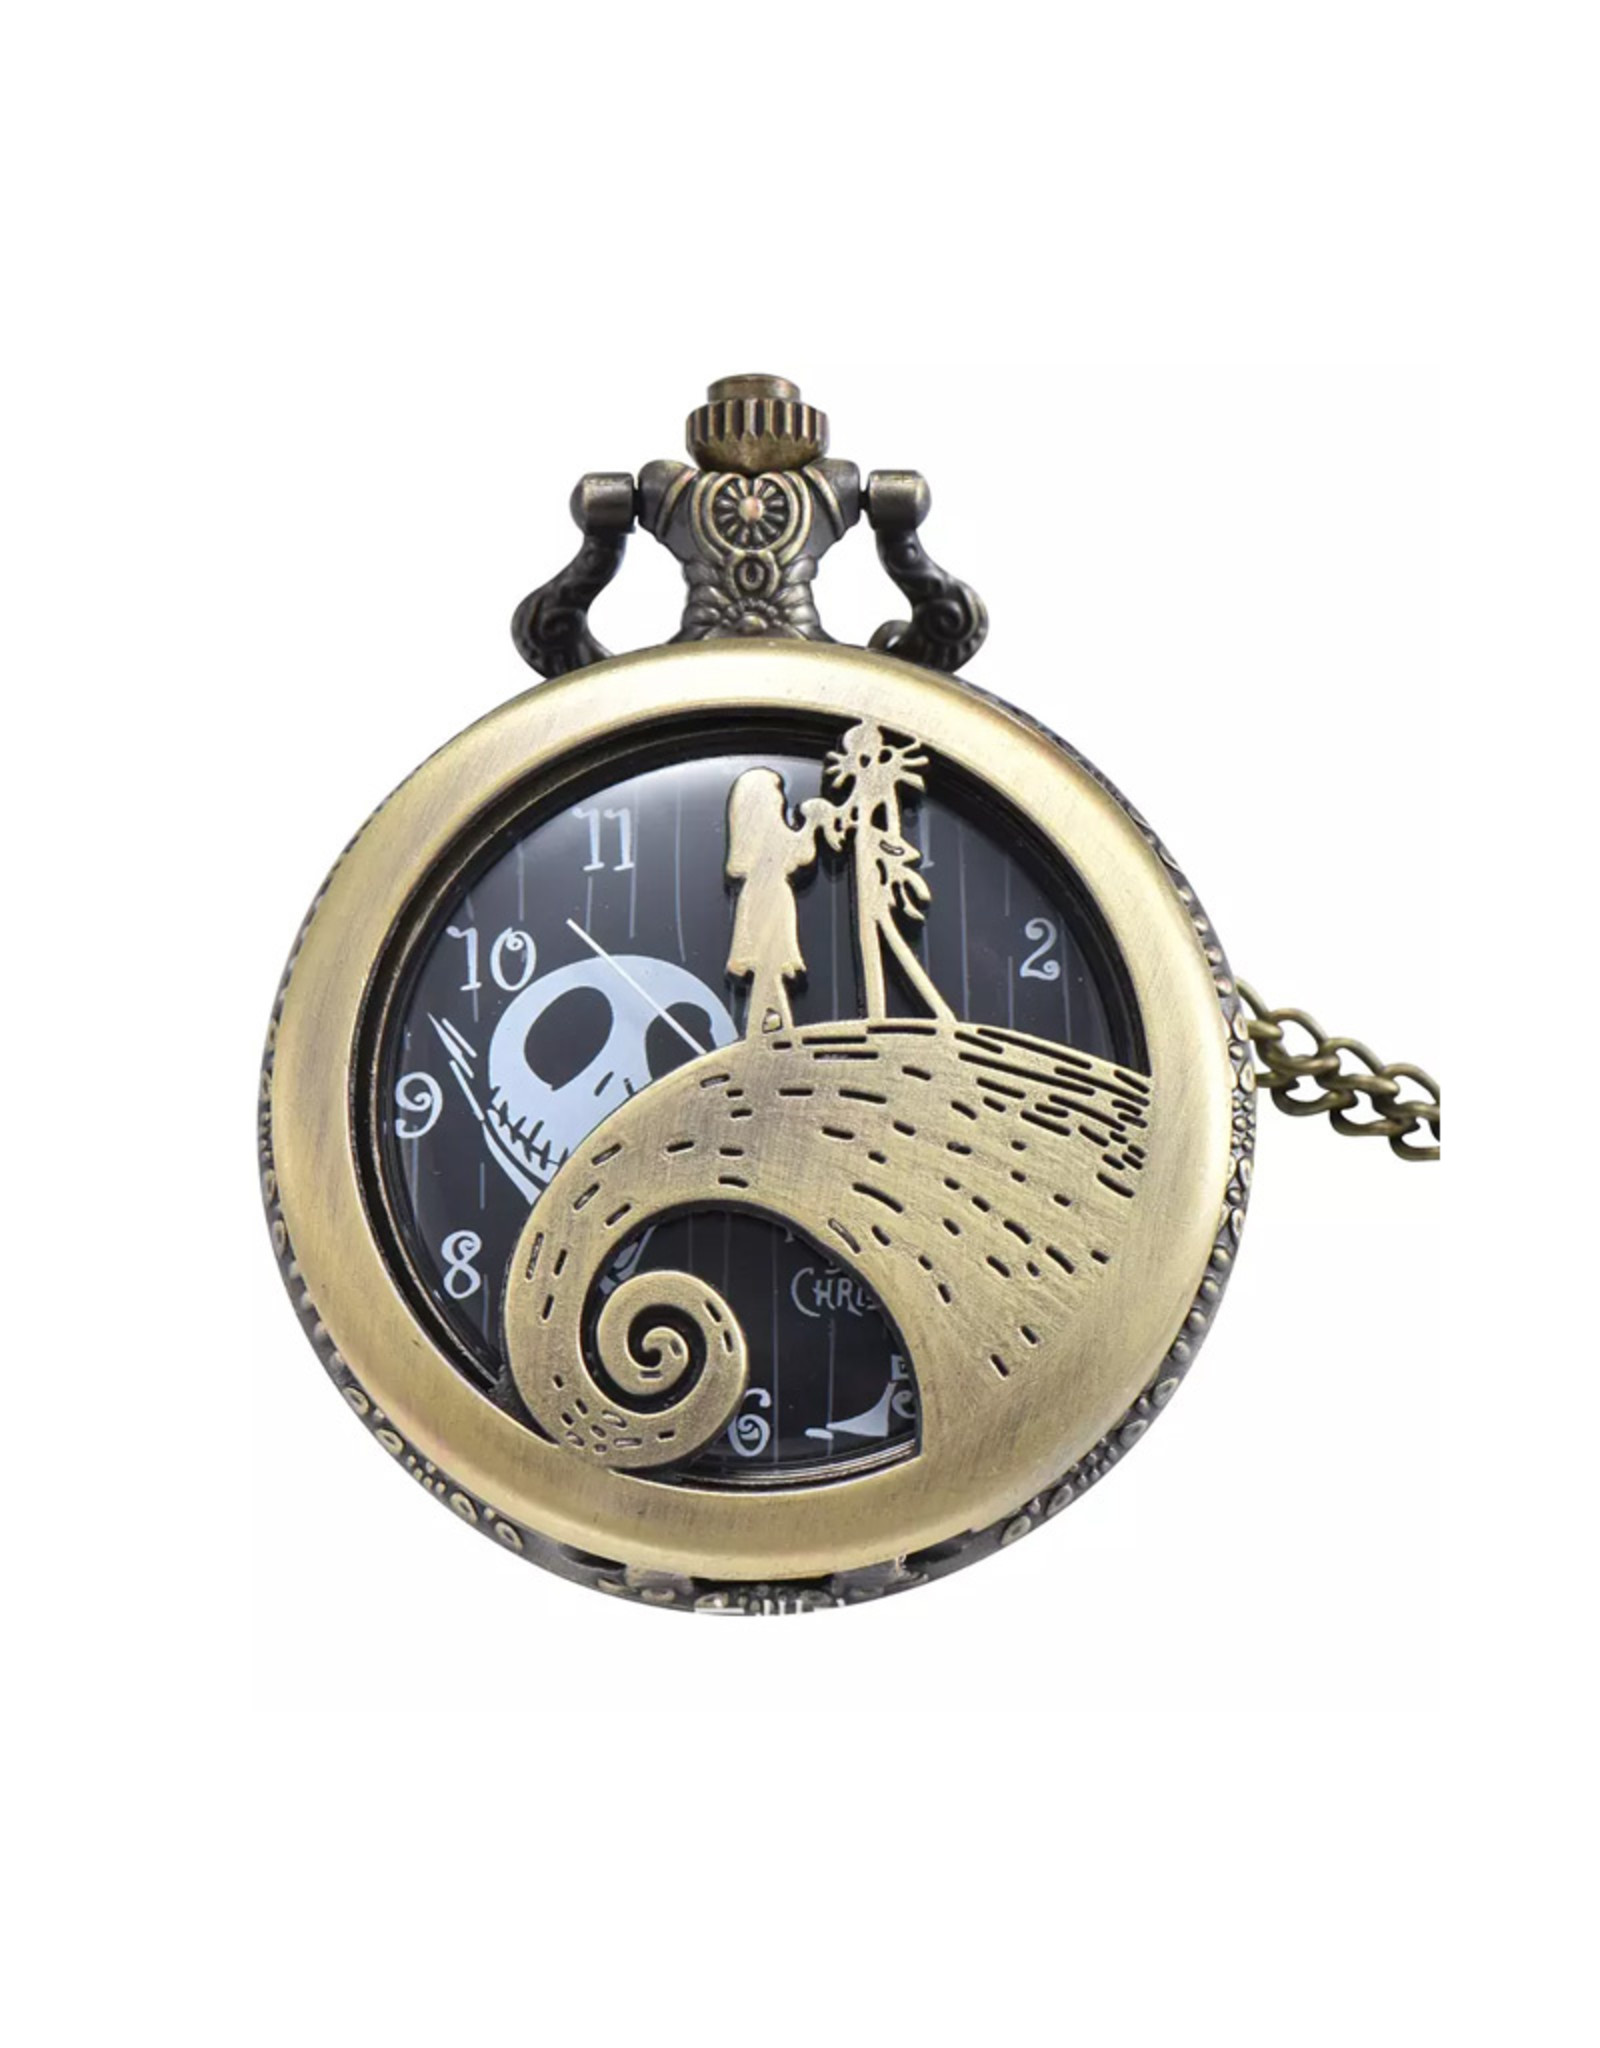 Alibaba Pocket Watch: Nightmare Before Christmas On the Hill Gold